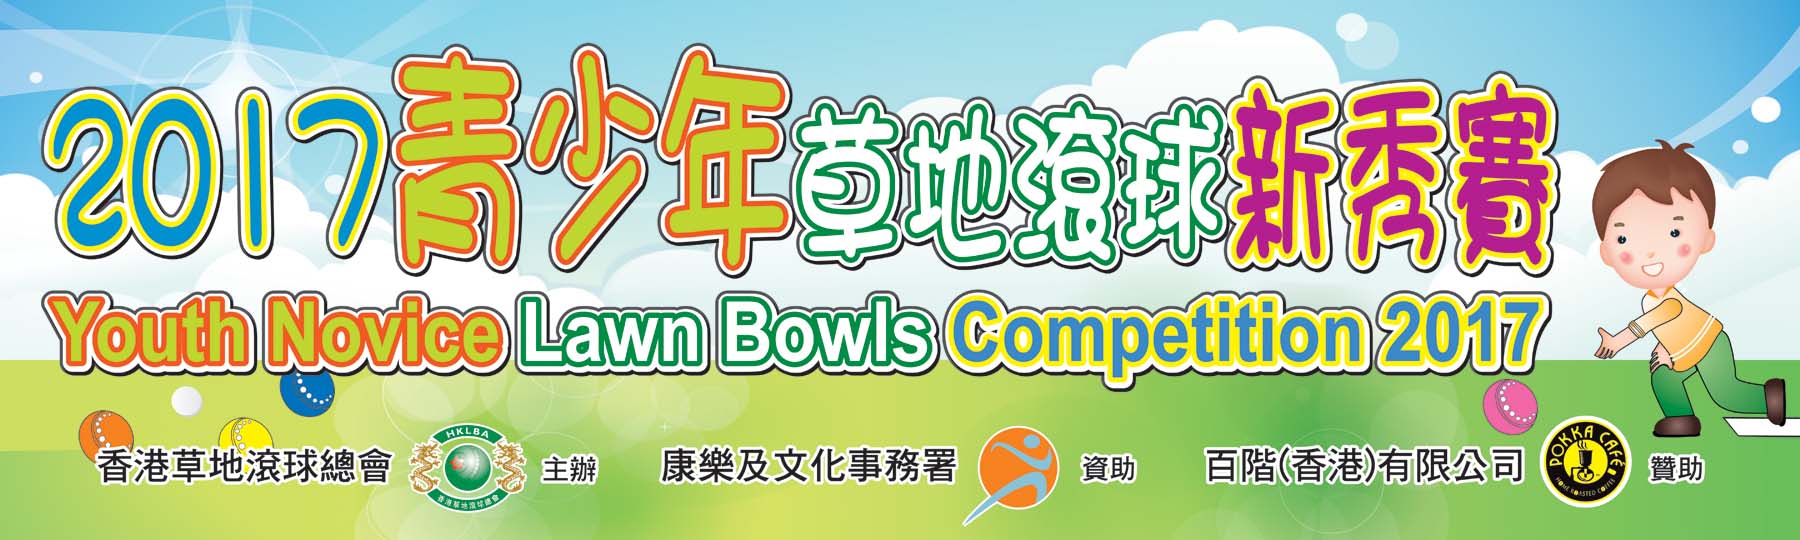 Youth Novice Lawn Bowls Competition 2017 (Updated on 7/3/17)